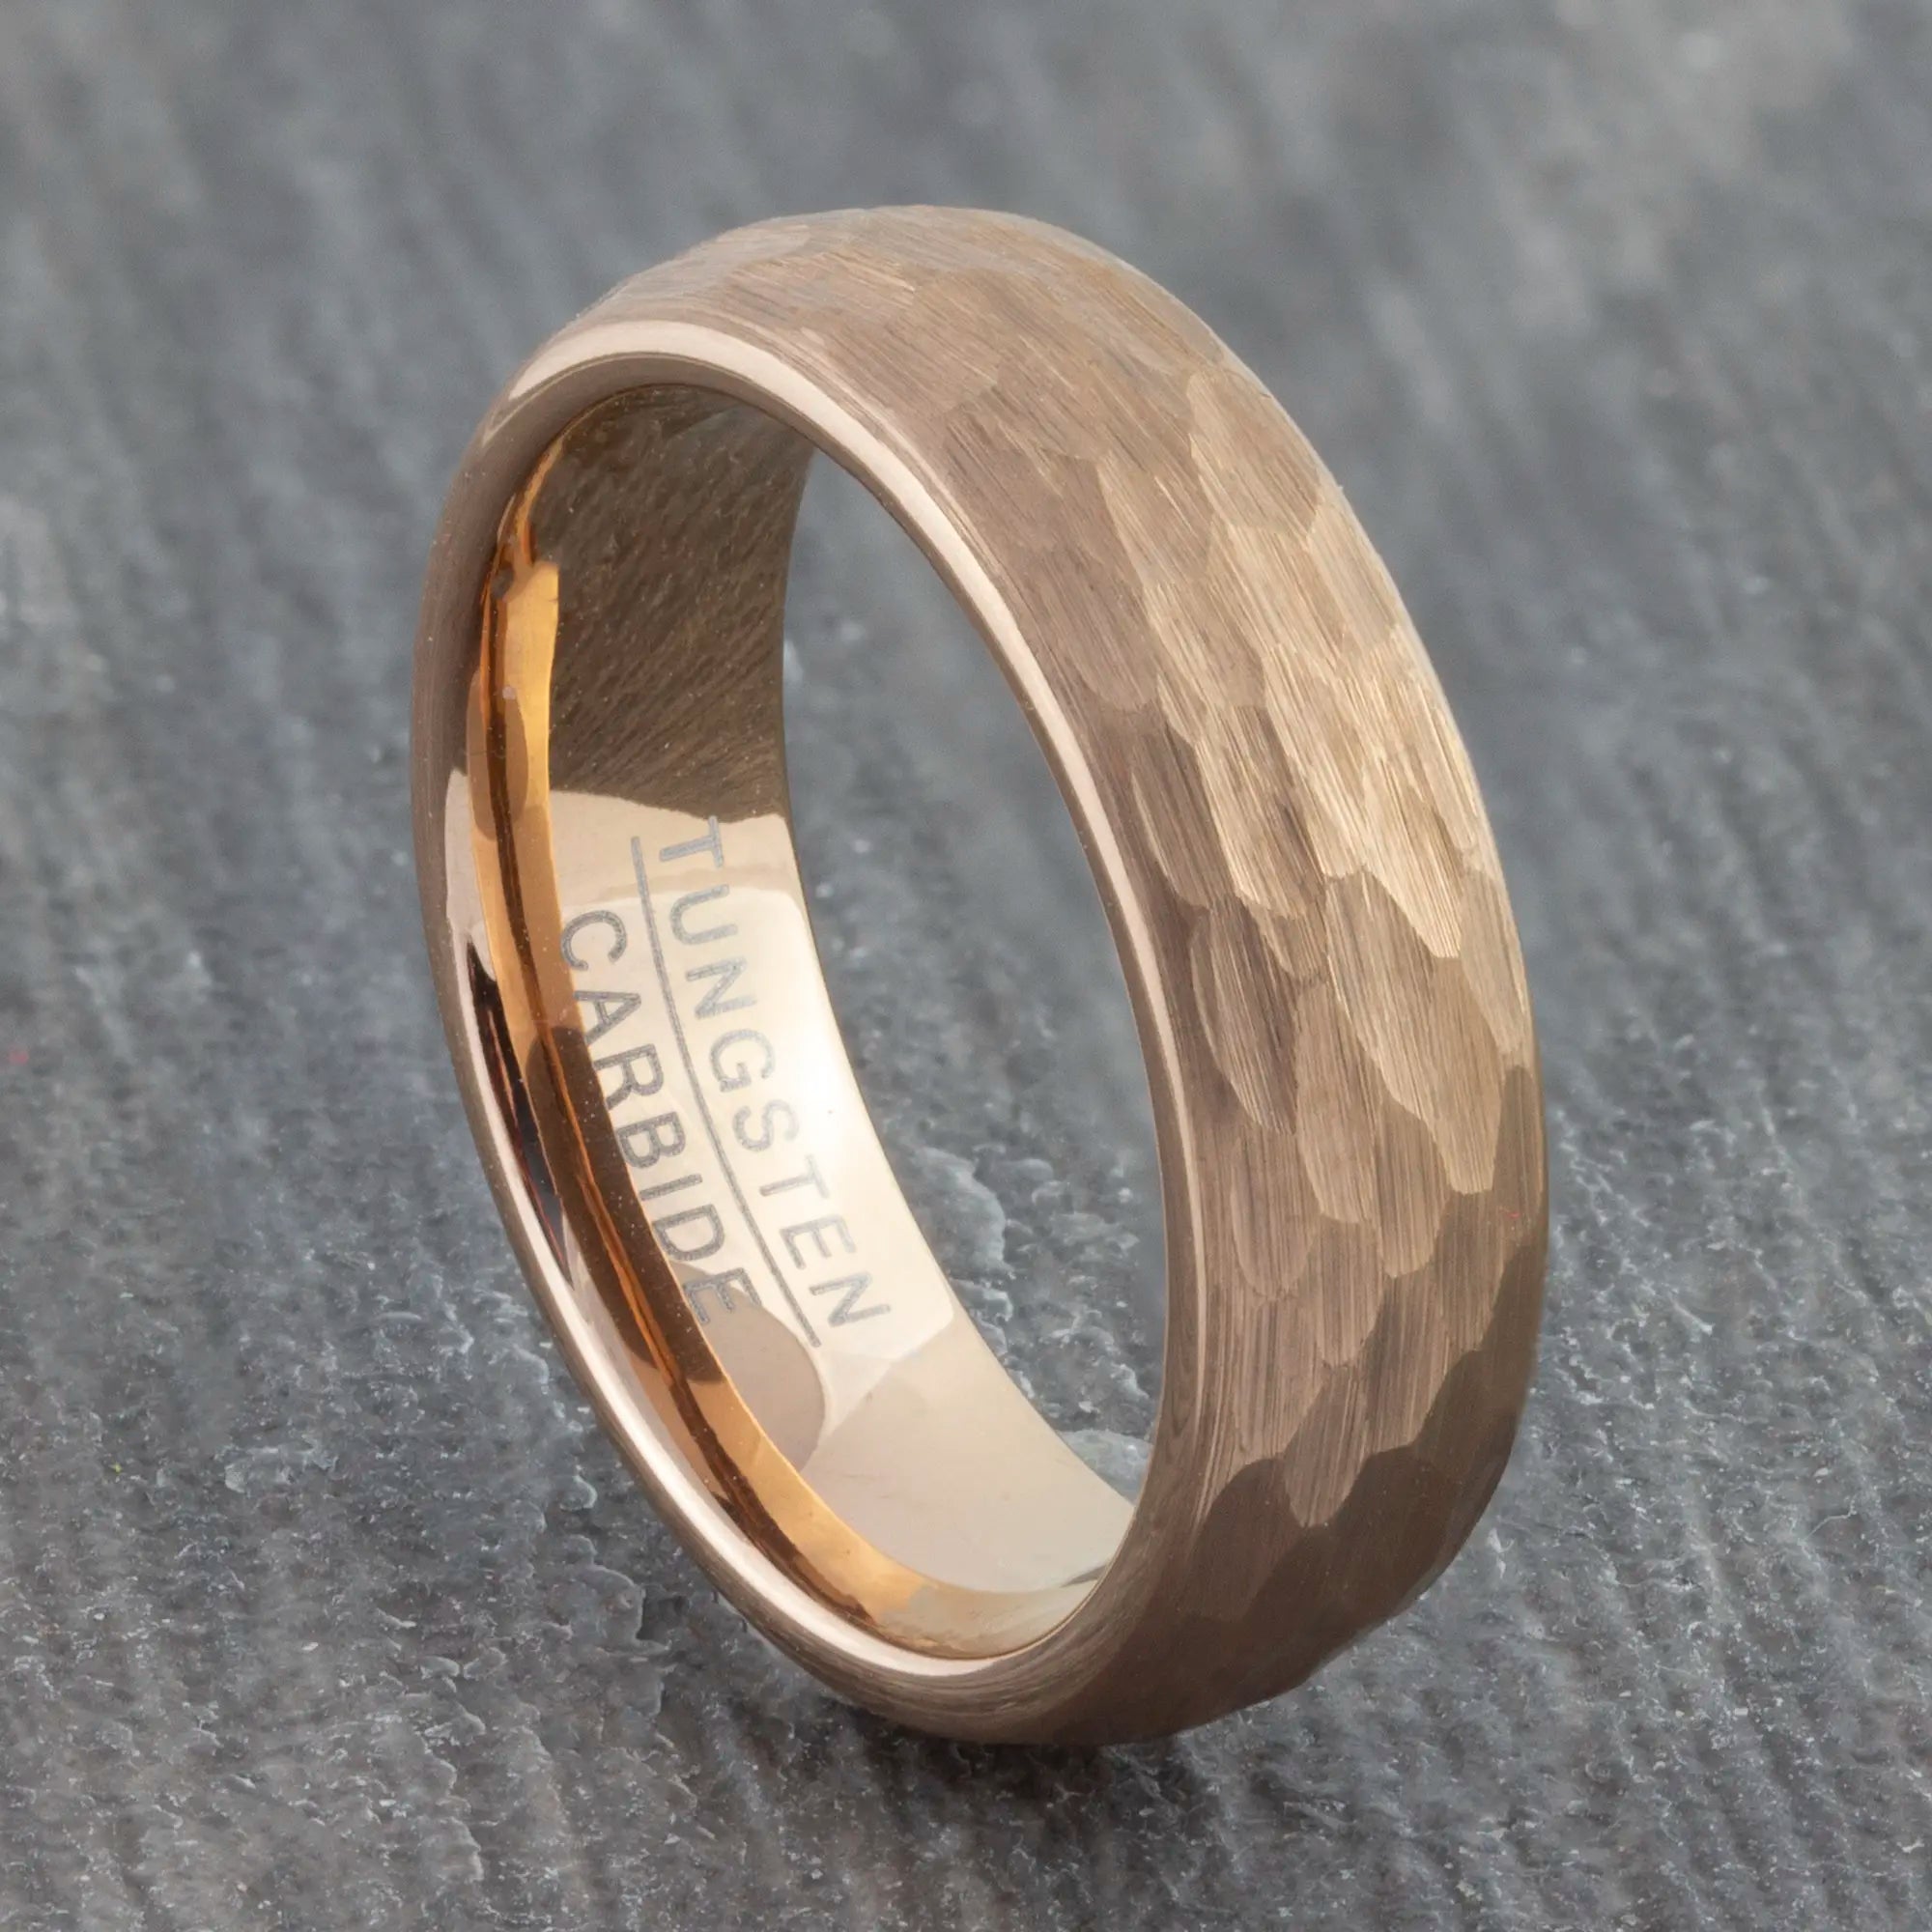 Unique Wedding Rings for Men, Dark Tungsten Wood Rings with Hammered Texture 12